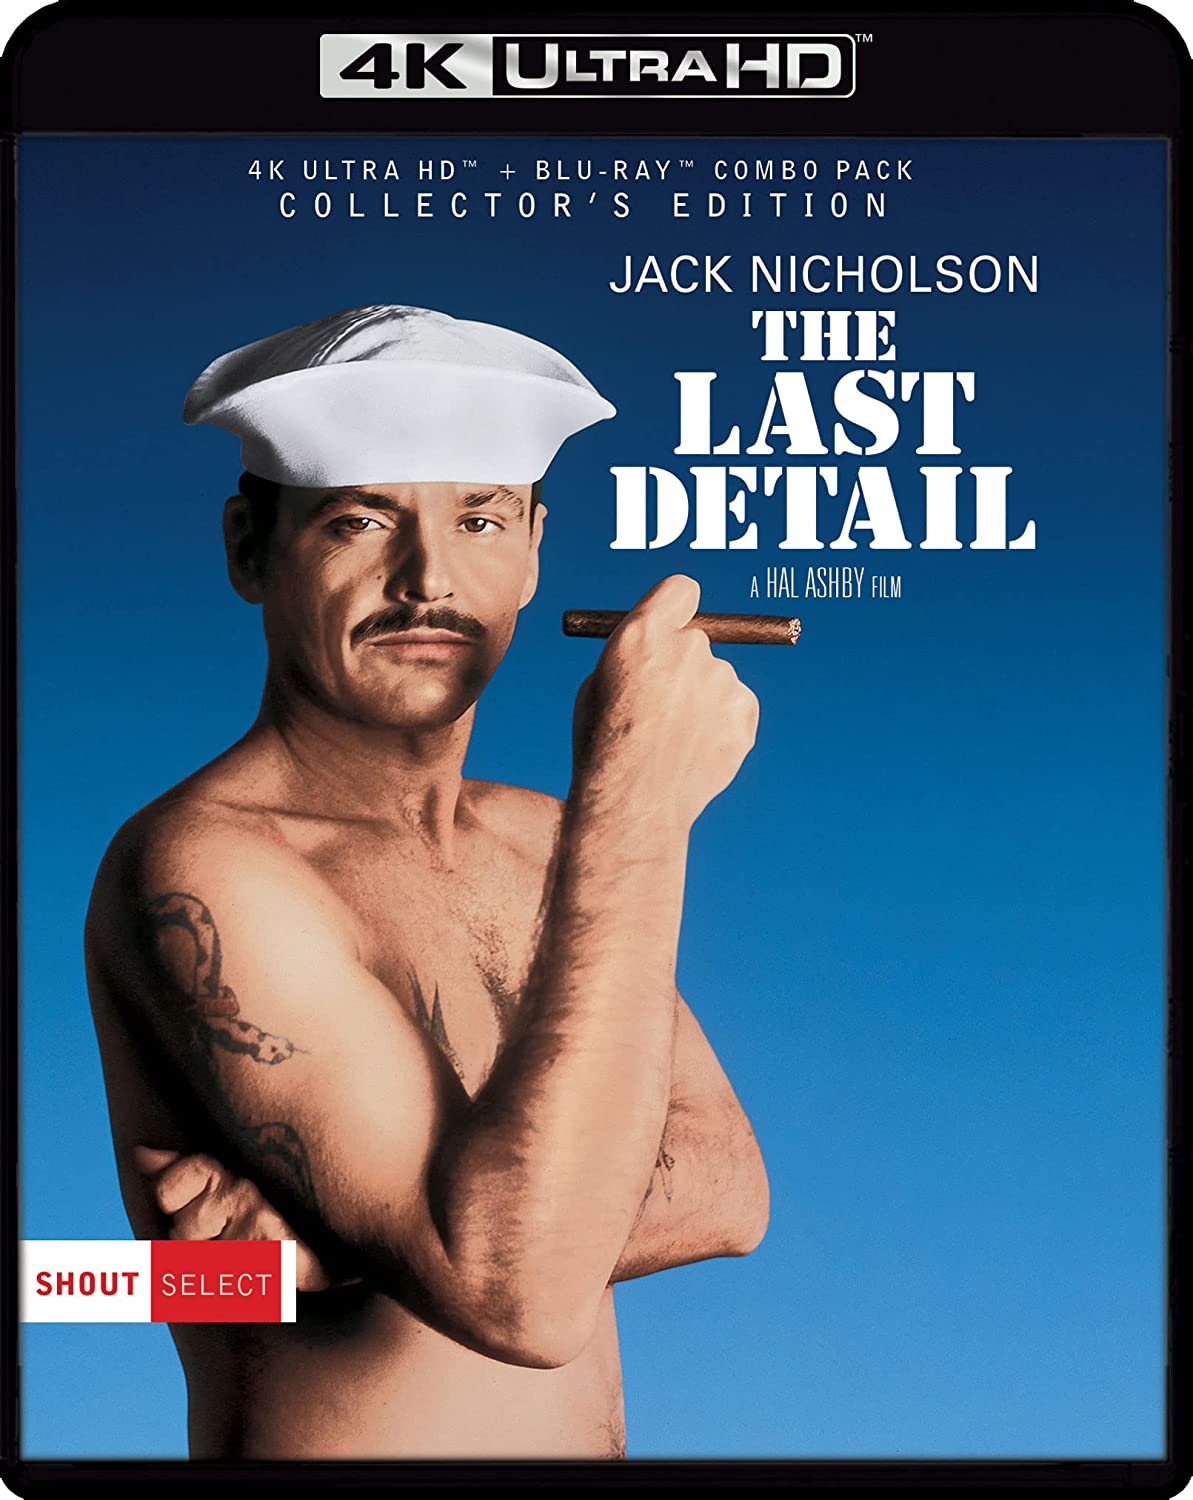 The Last Detail - Collectors Edition 4k Blu-ray